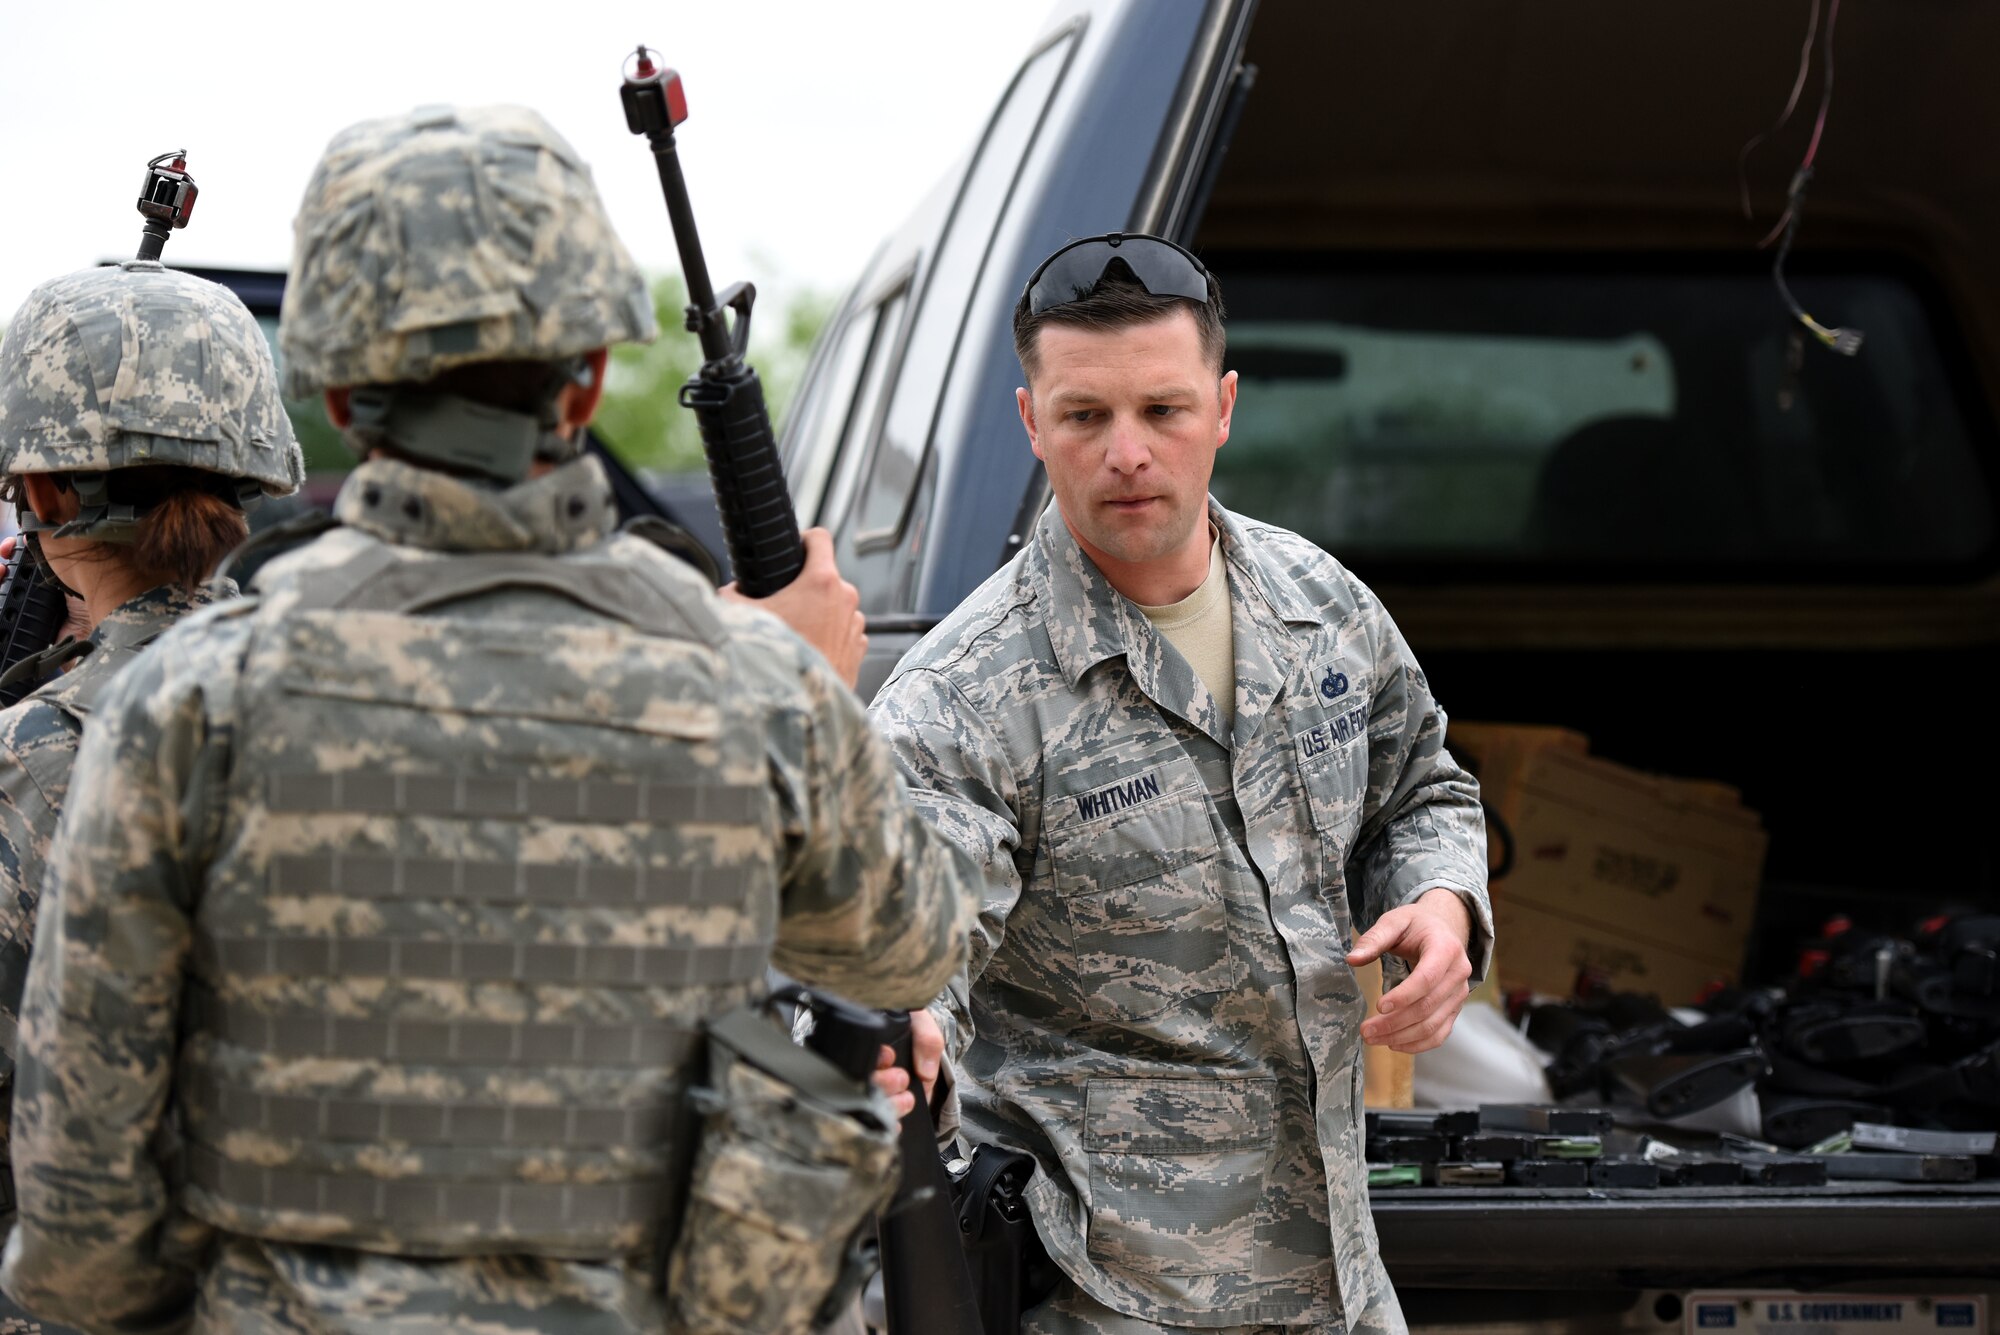 U.S. Air Force Staff Sgt. Zachary Whitman, 17th Security Forces Squadron unit trainer, issues weapons and blank ammunition to cadets at the mock forward operating base on Goodfellow Air Force Base, Texas, April 20, 2018. Proper weapon handling techniques was one of the areas covered in the training exercise. (U.S. Air Force photo by Airman 1st Class Seraiah Hines/Released)